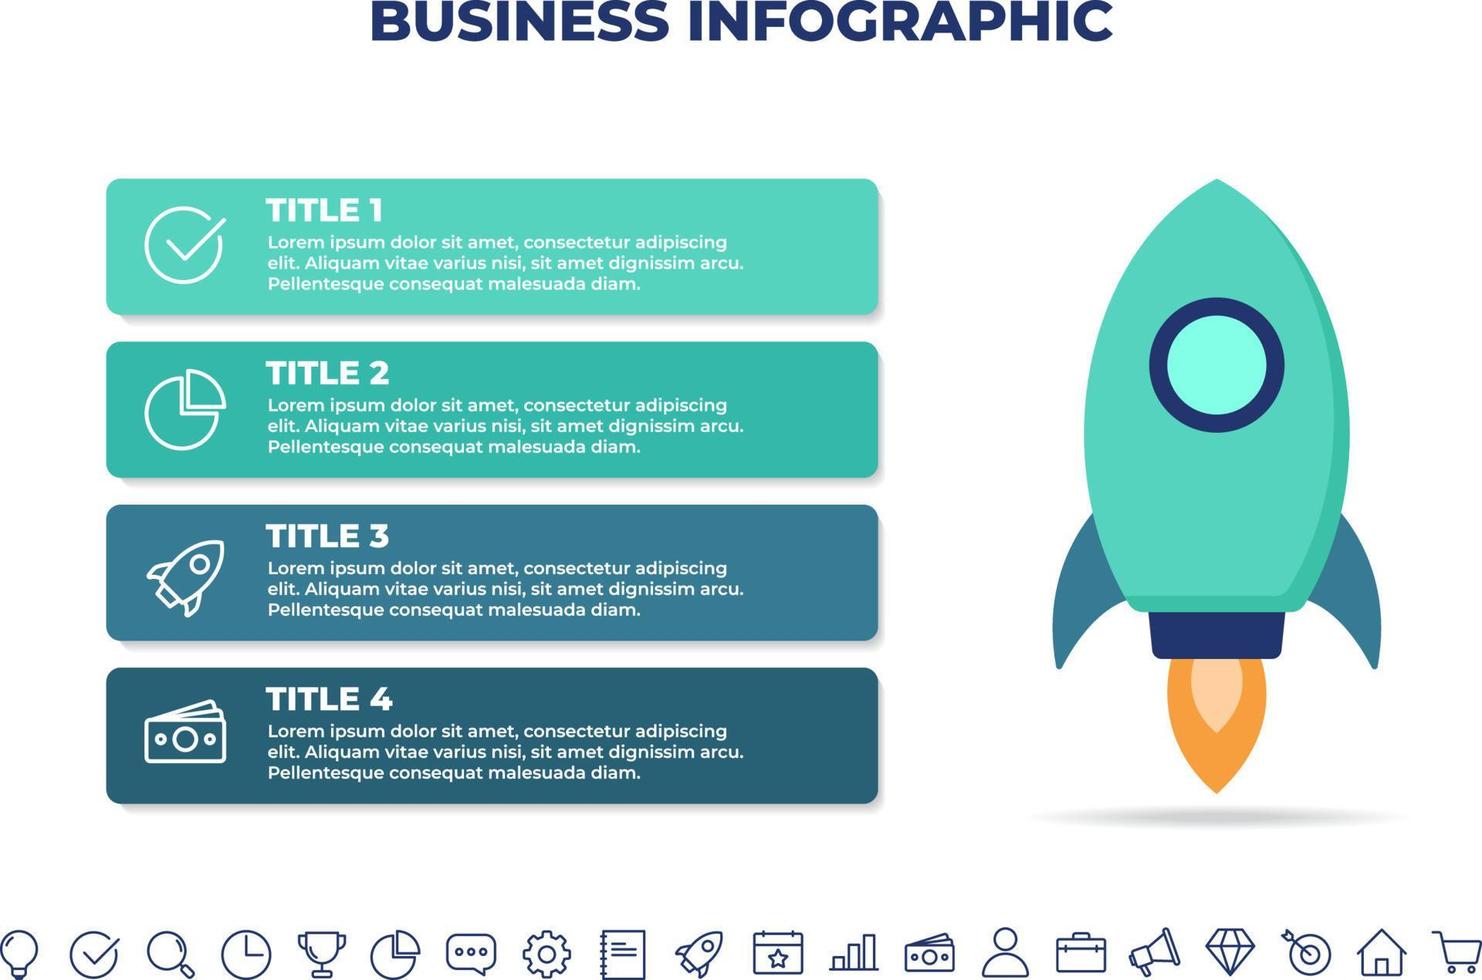 startup infographic design template.business infographic template for presentations, banner, workflow layout, process diagram, flow chart and how it work vector